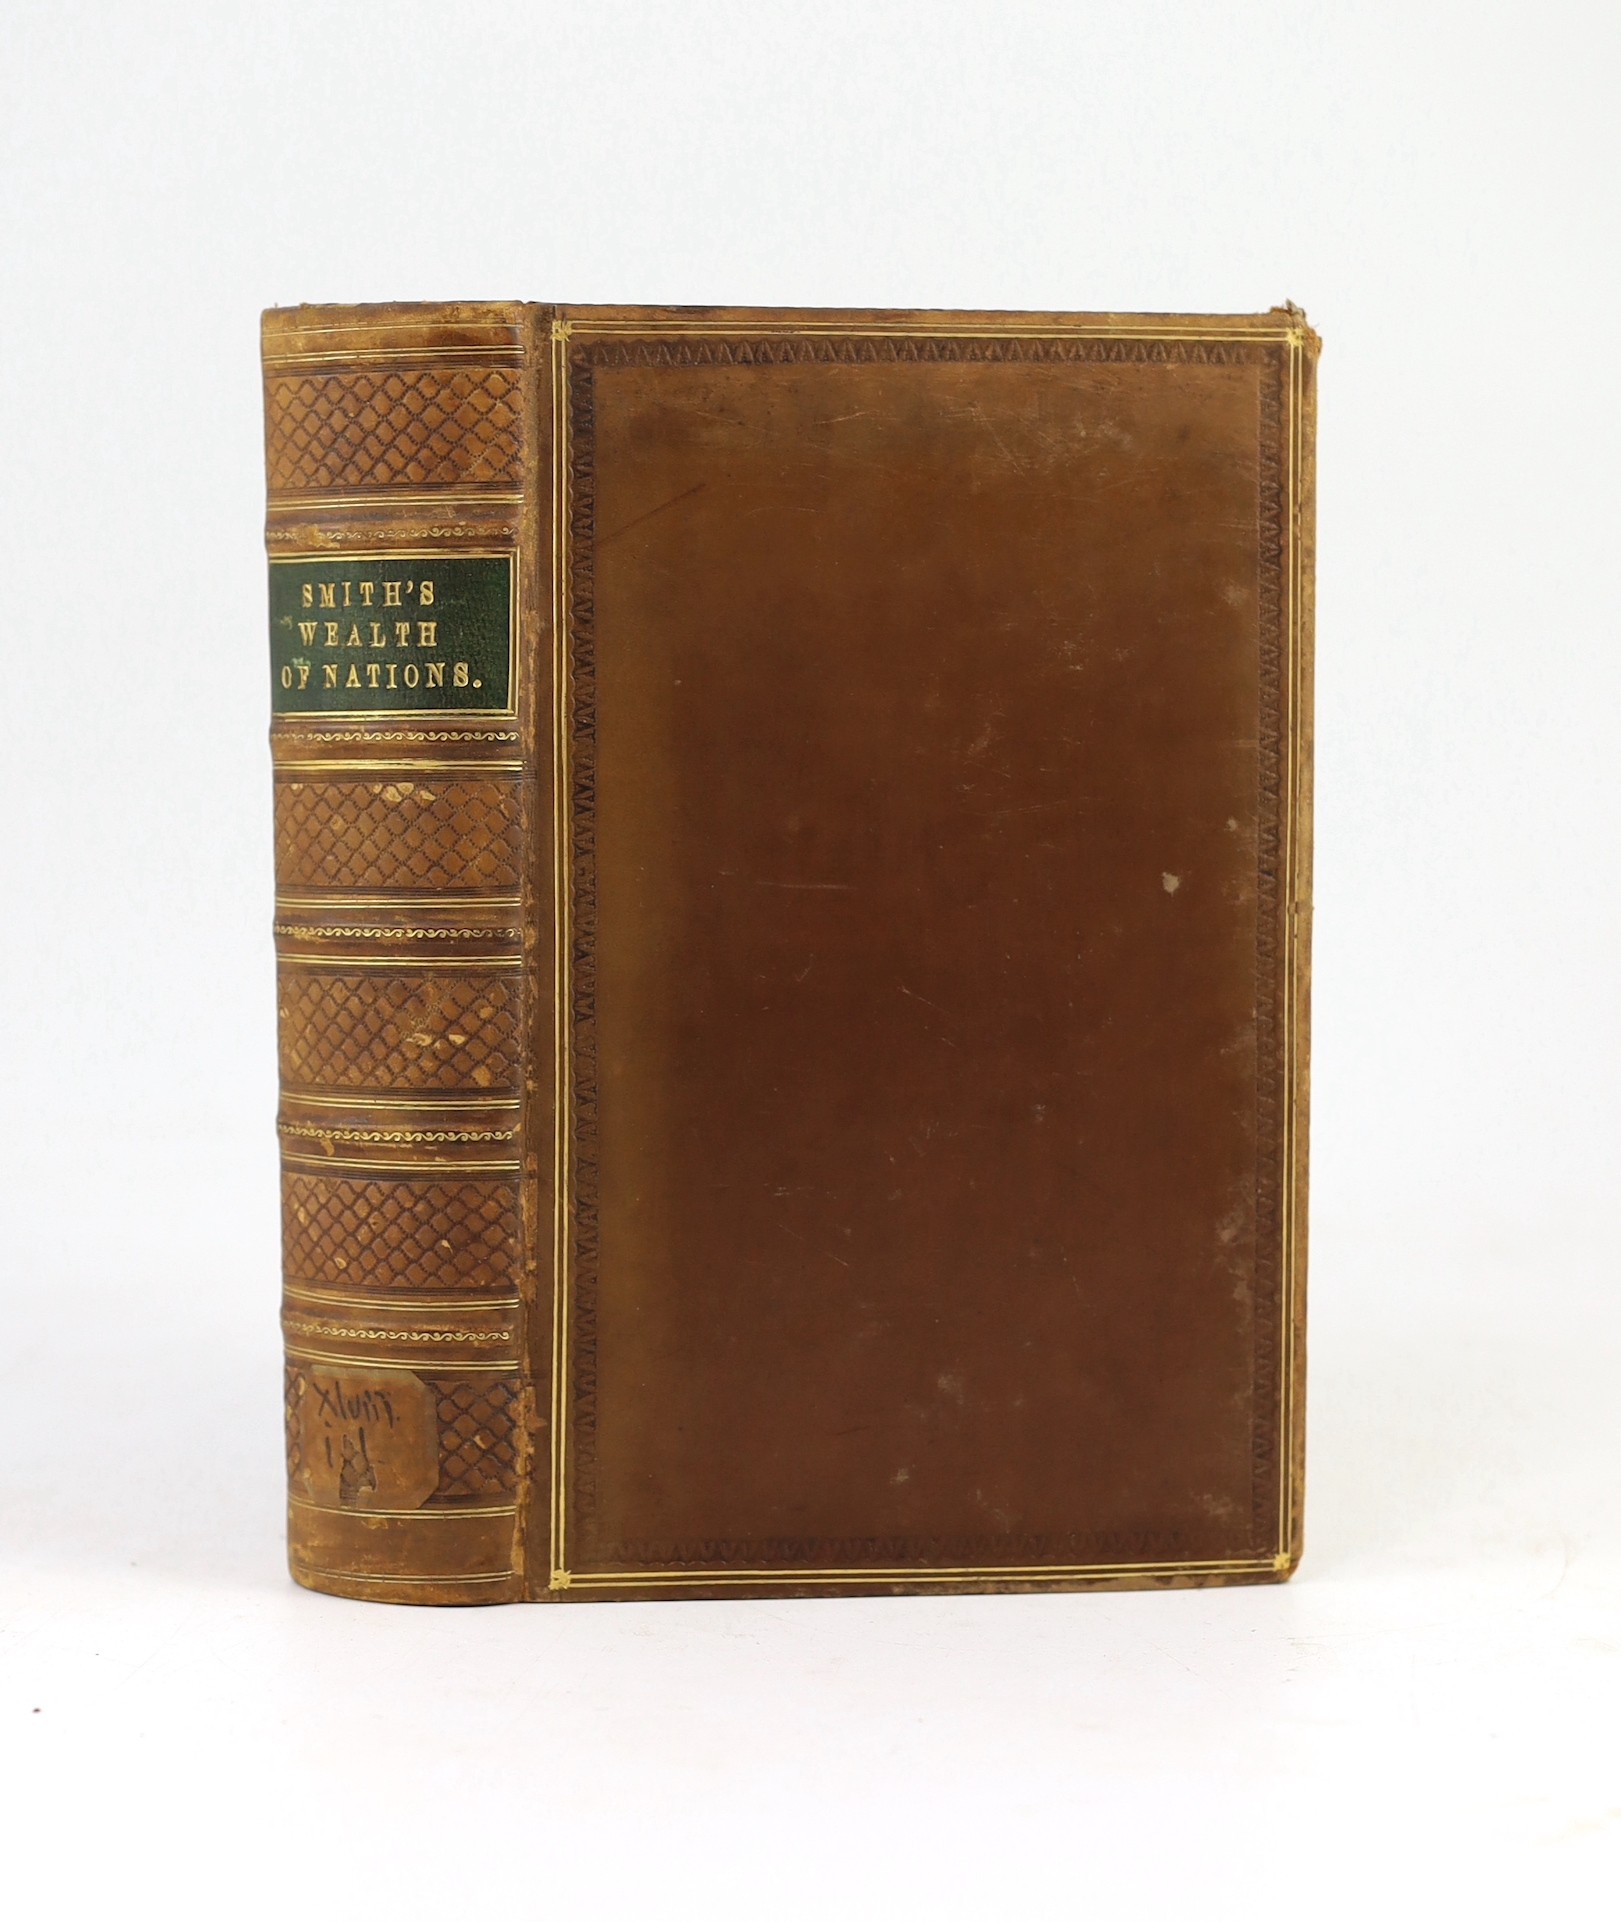 Smith, Adam - An Inquiry into the Nature and Causes of the Wealth of Nations. With a life of the author, an introductory discourse, notes and supplemental dissertations, by J.R. McCulloch.